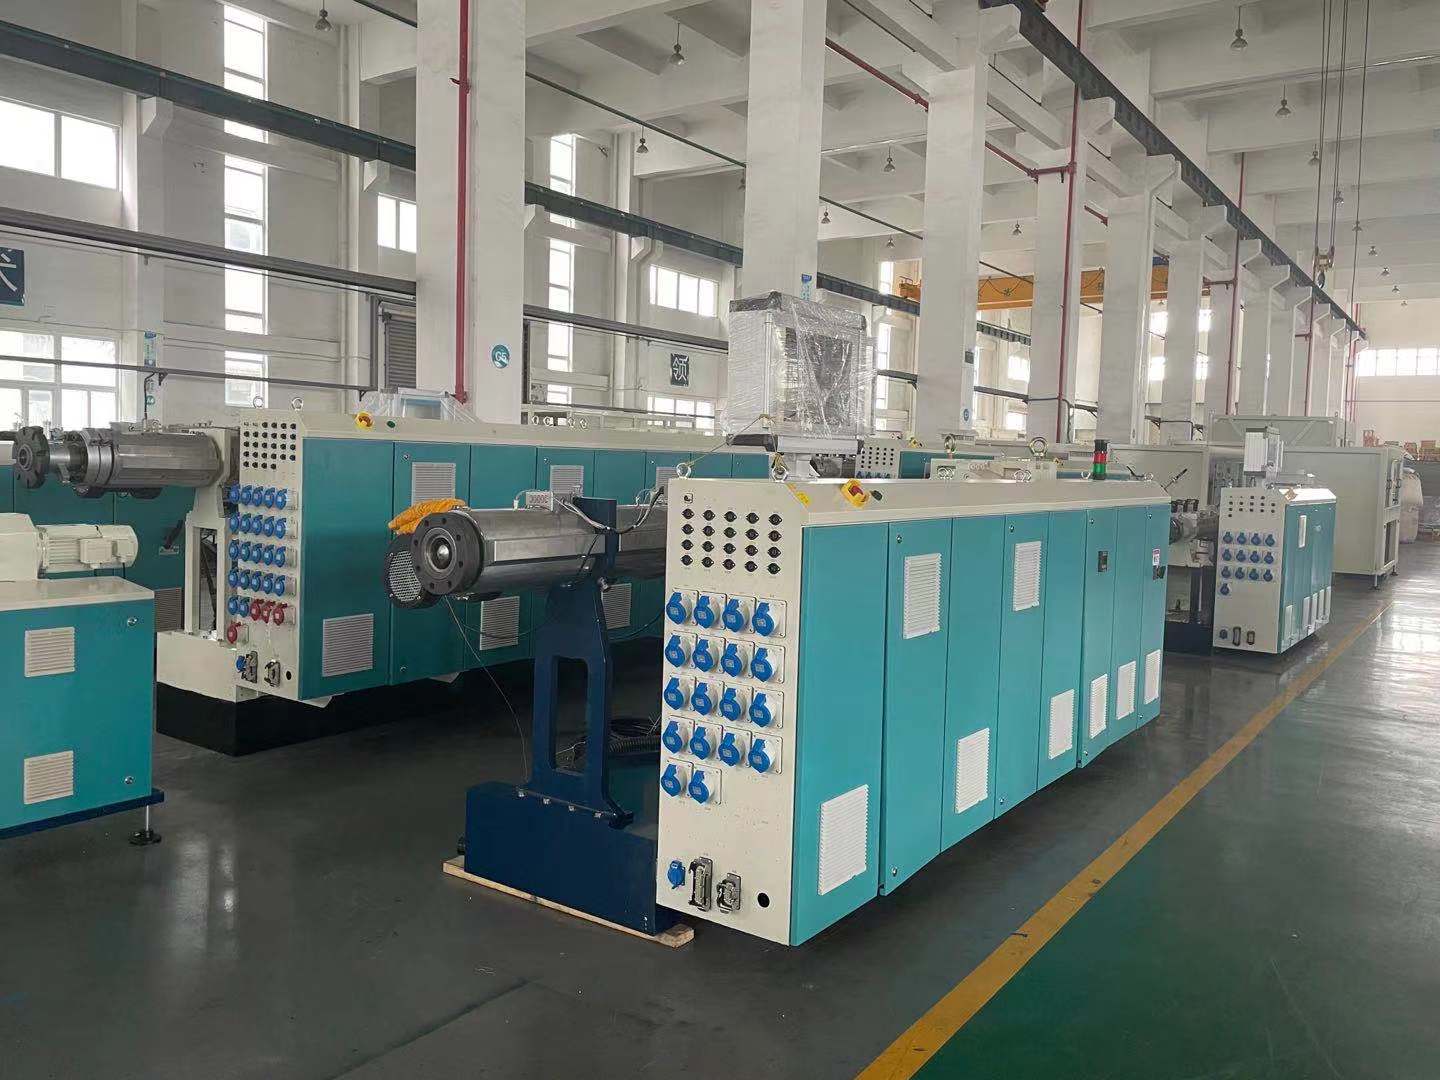 The manufacturer talks about the reasons for the damage of the screw and barrel of the plastic extruder after long-term use